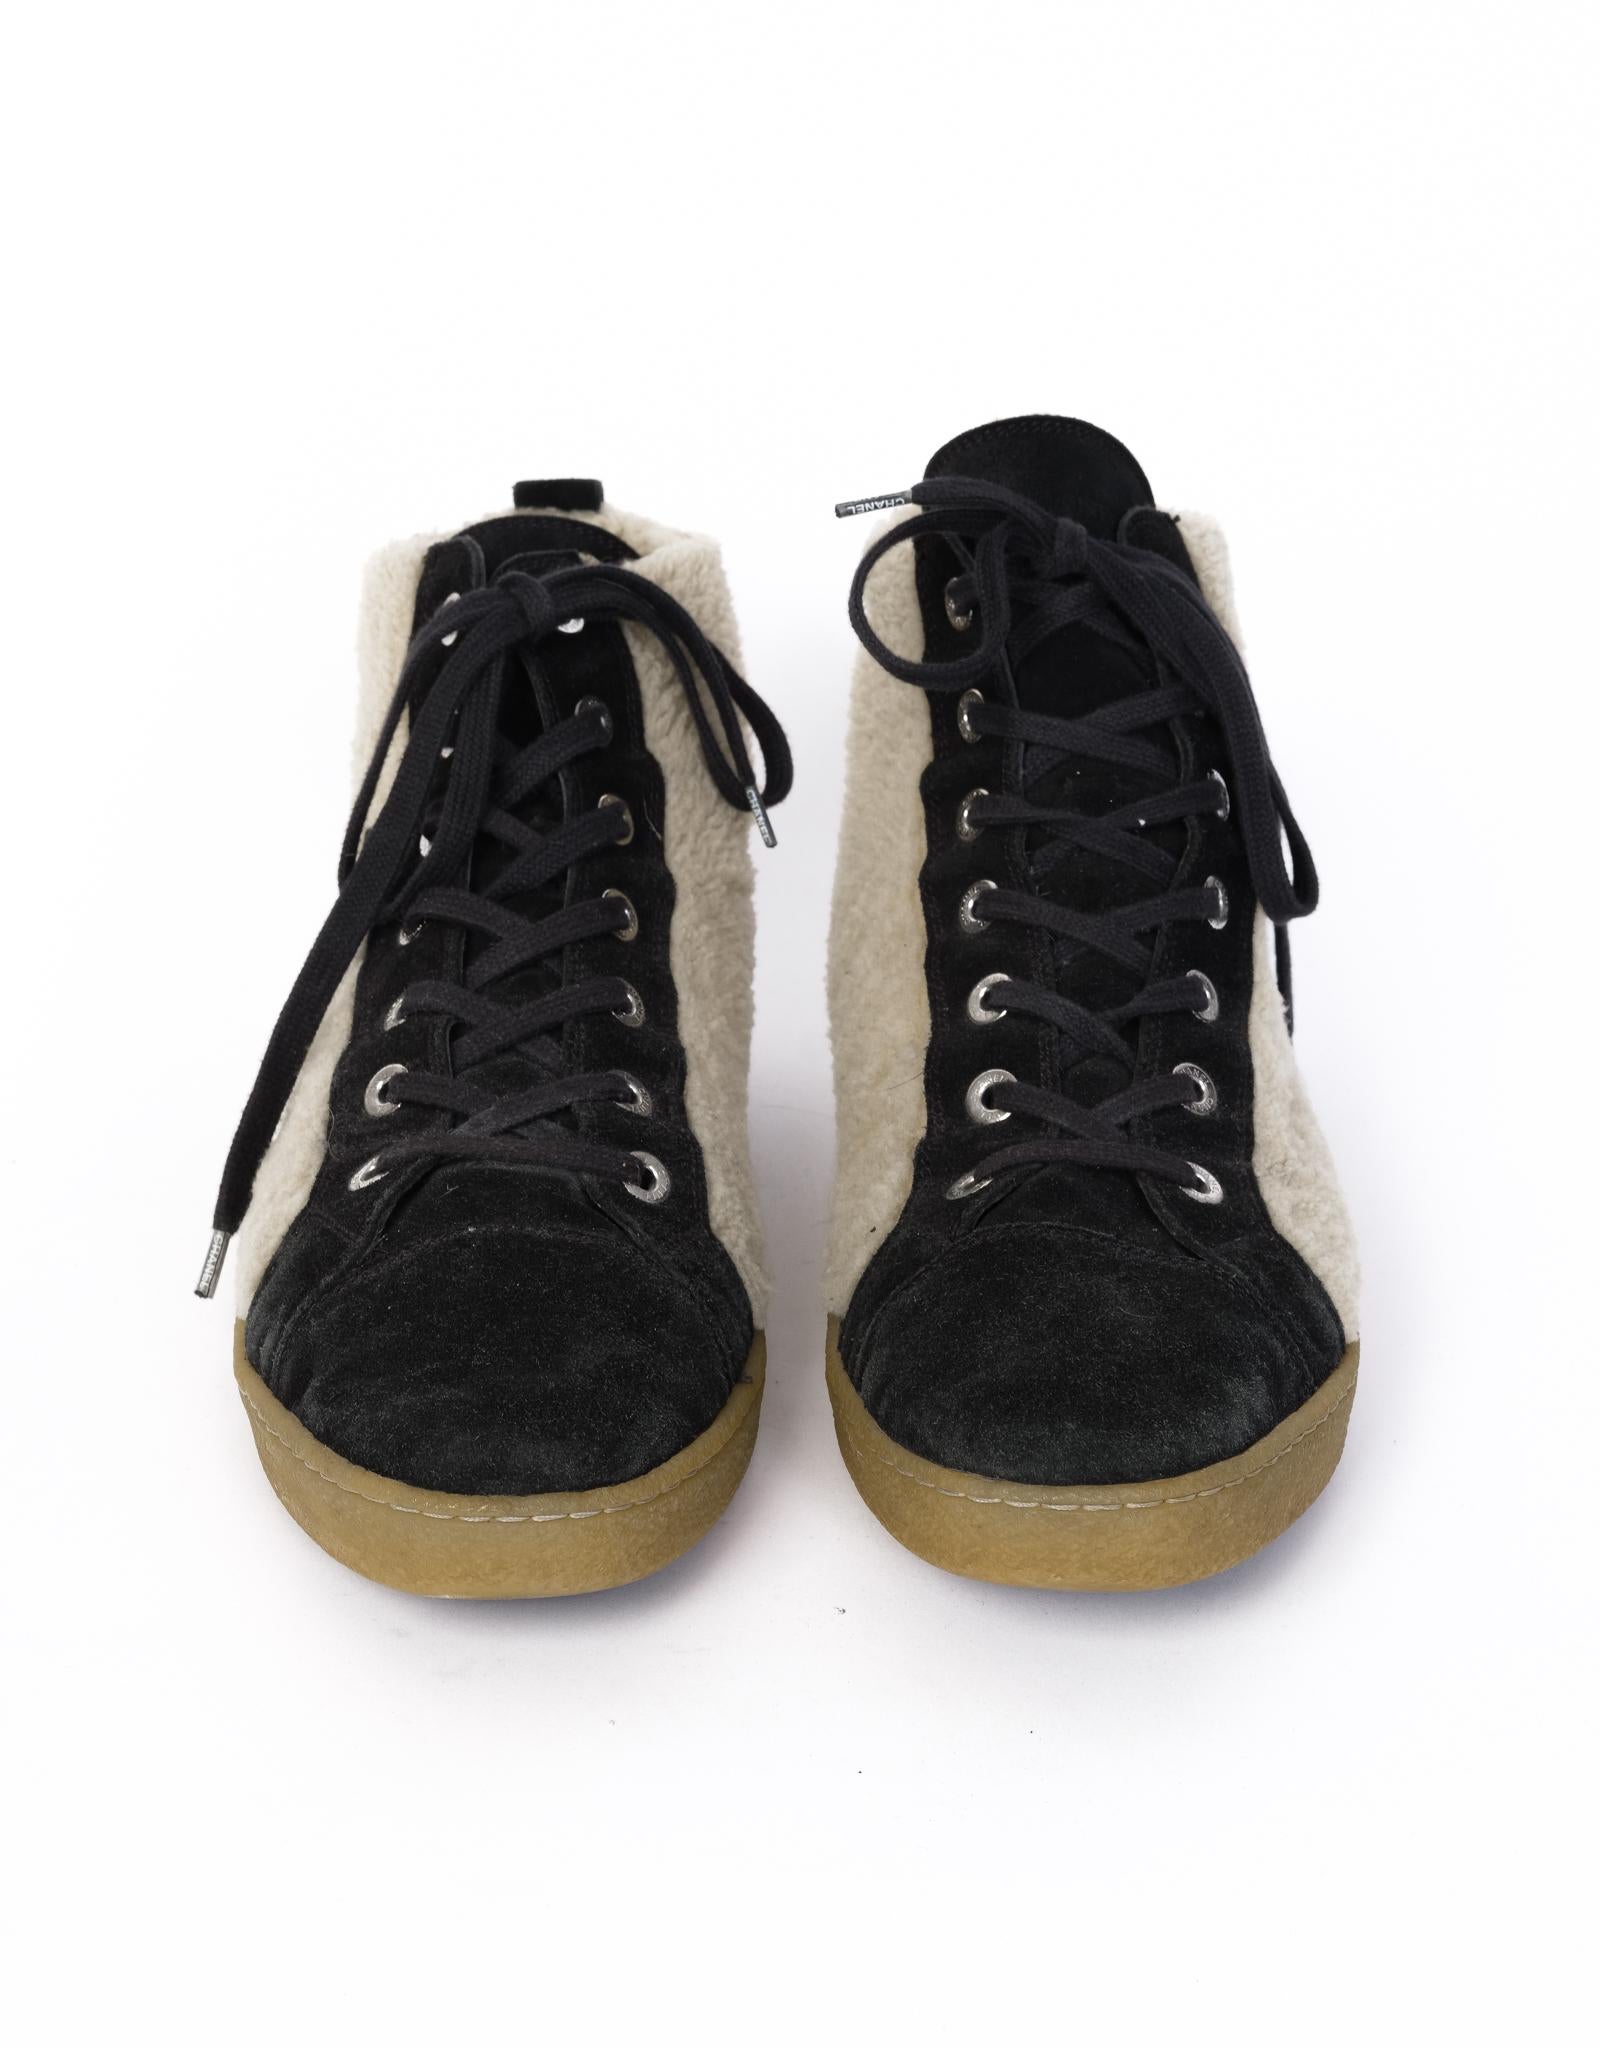 Black and tan suede and shearling Chanel round-toe high-top sneakers with interlocking CC accents at sides, rubber soles and lace-up closures at uppers. 

COLOR/Material: Black suede/ Cream Shearling
SIZE: 44 EU / 11 US MENS
PLATFORM HEIGHT: .75”